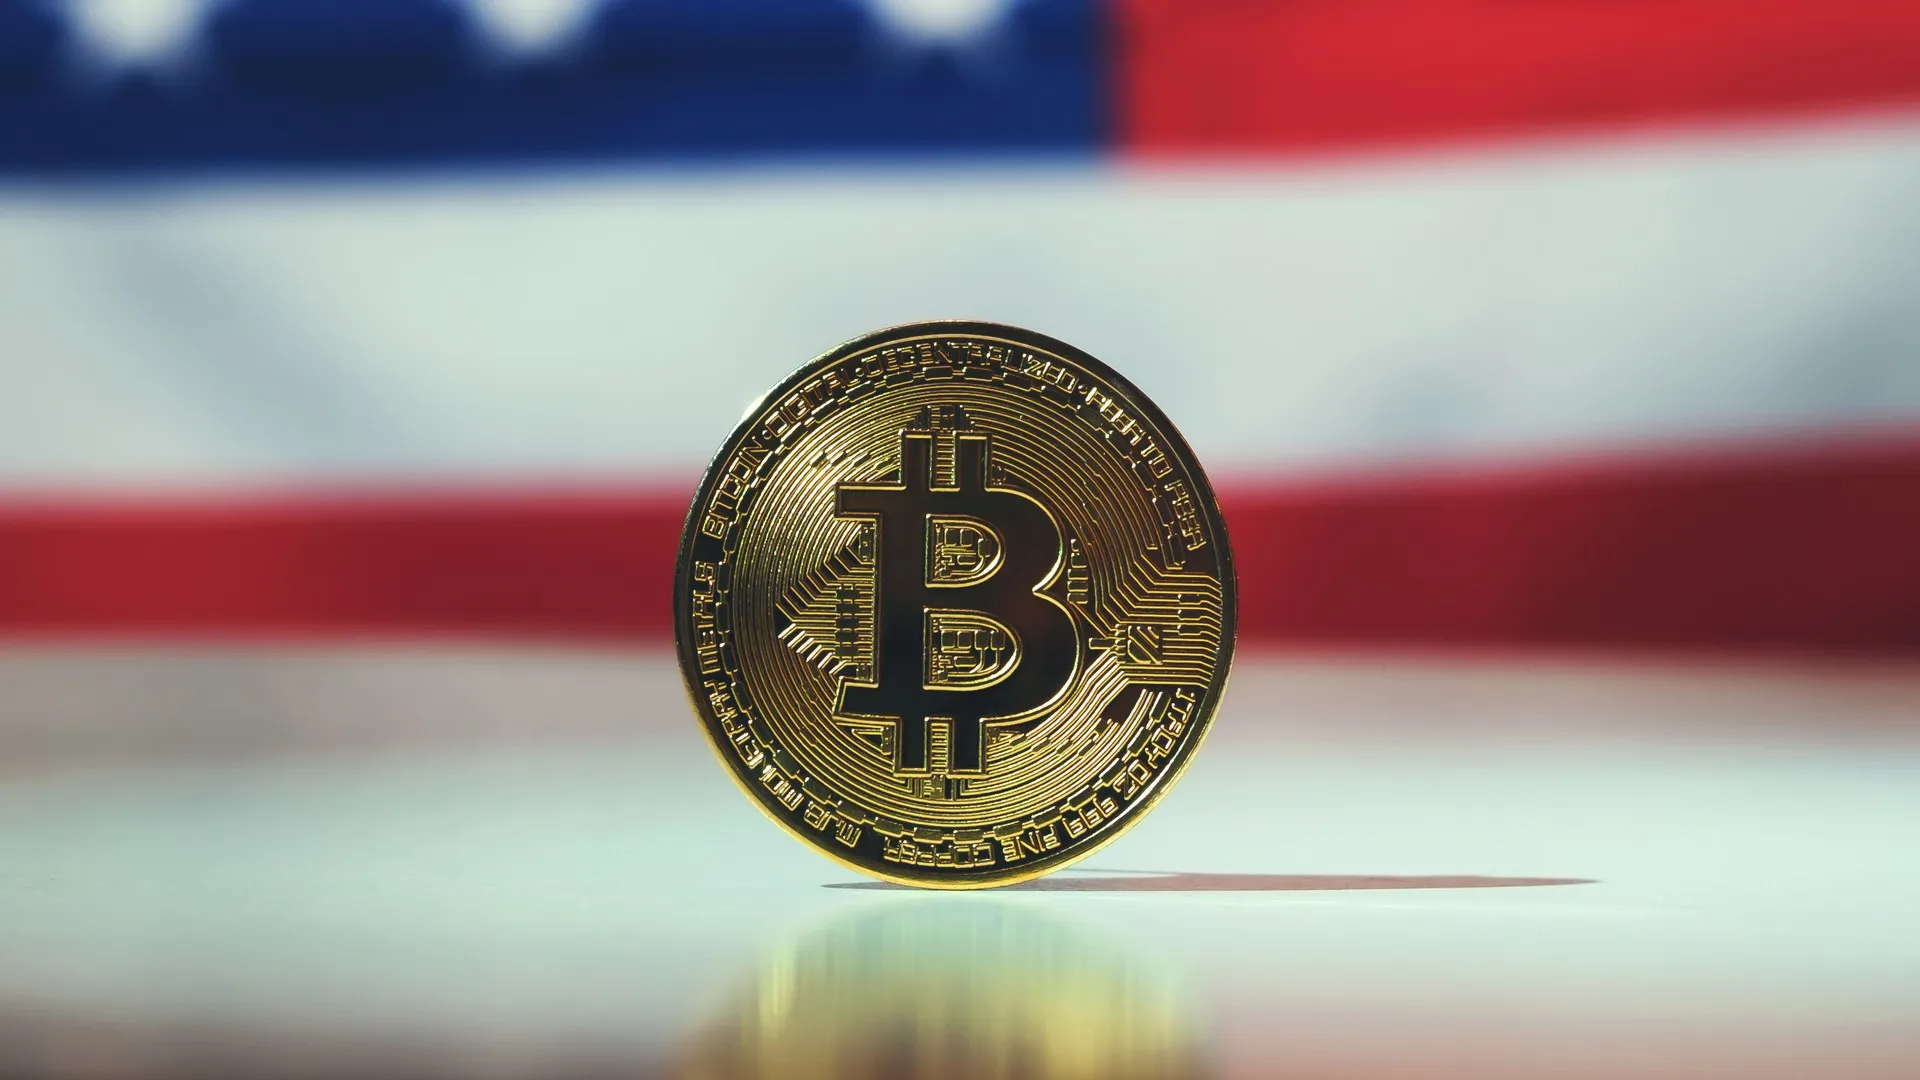 Bitcoin Against the American Flag stock photo